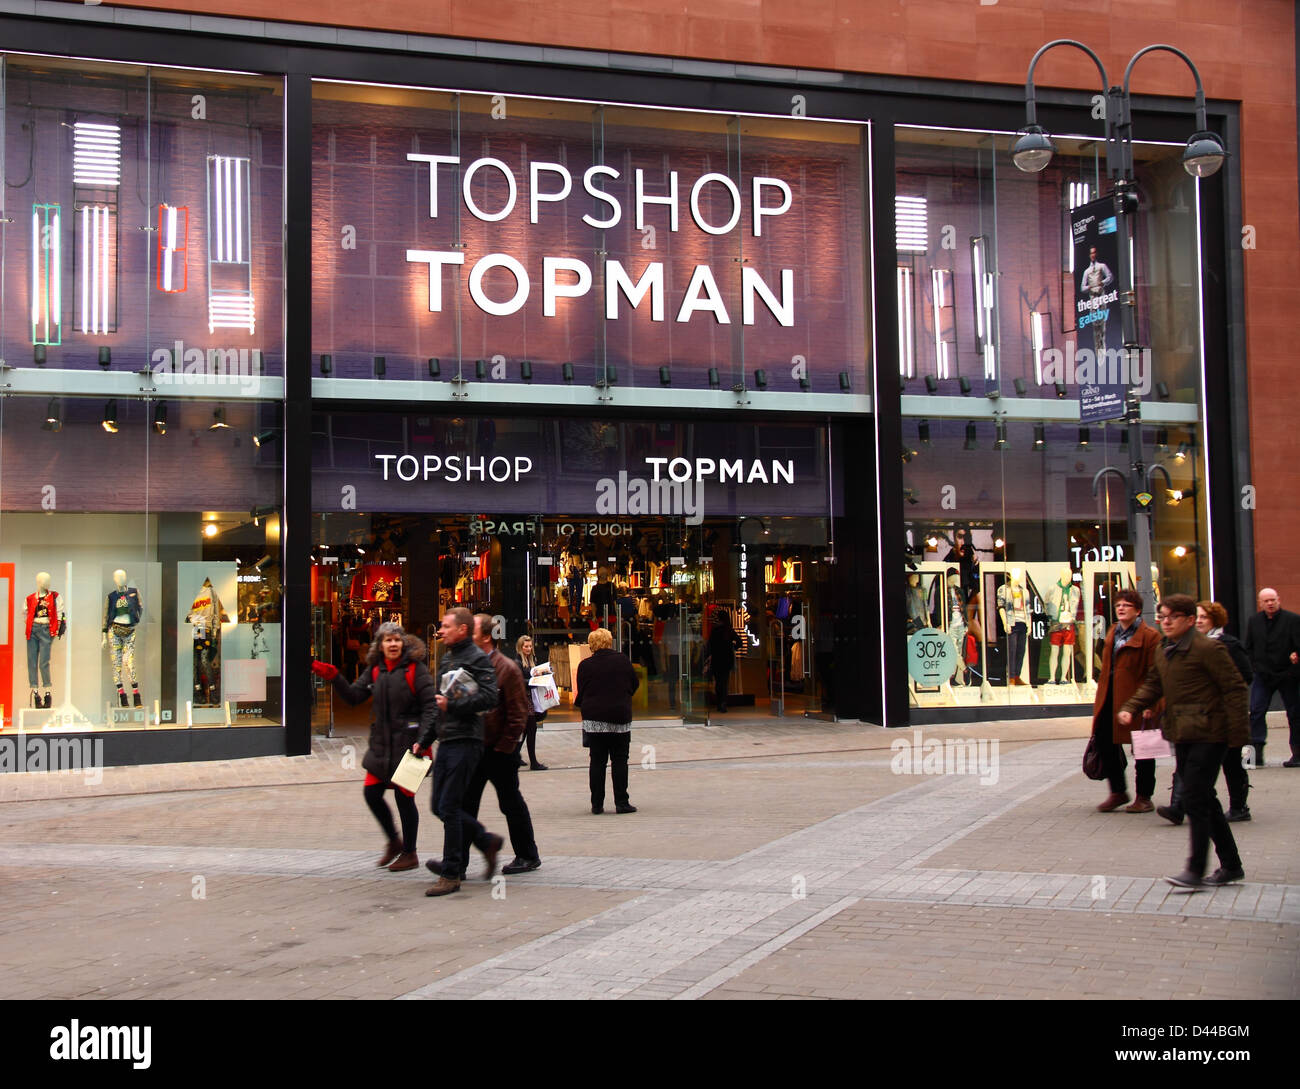 Topshop and Topman Shop in Leeds City Center, Yorkshire Stock Photo - Alamy